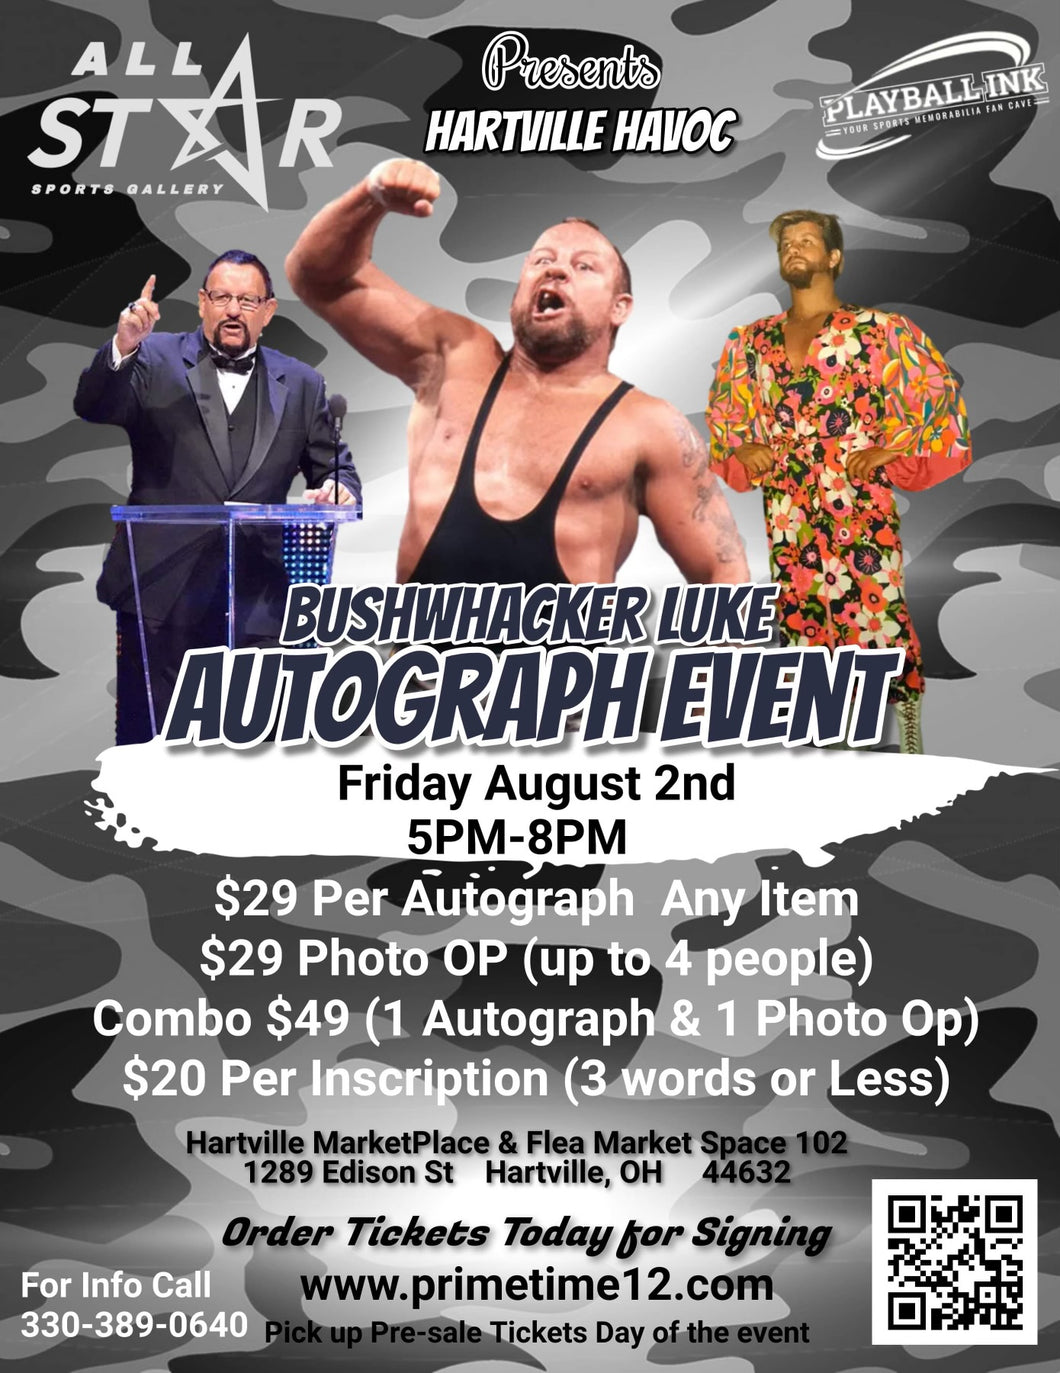 Bushwhacker Luke Pre-Sale ticket for autograph signing on your any 1 item